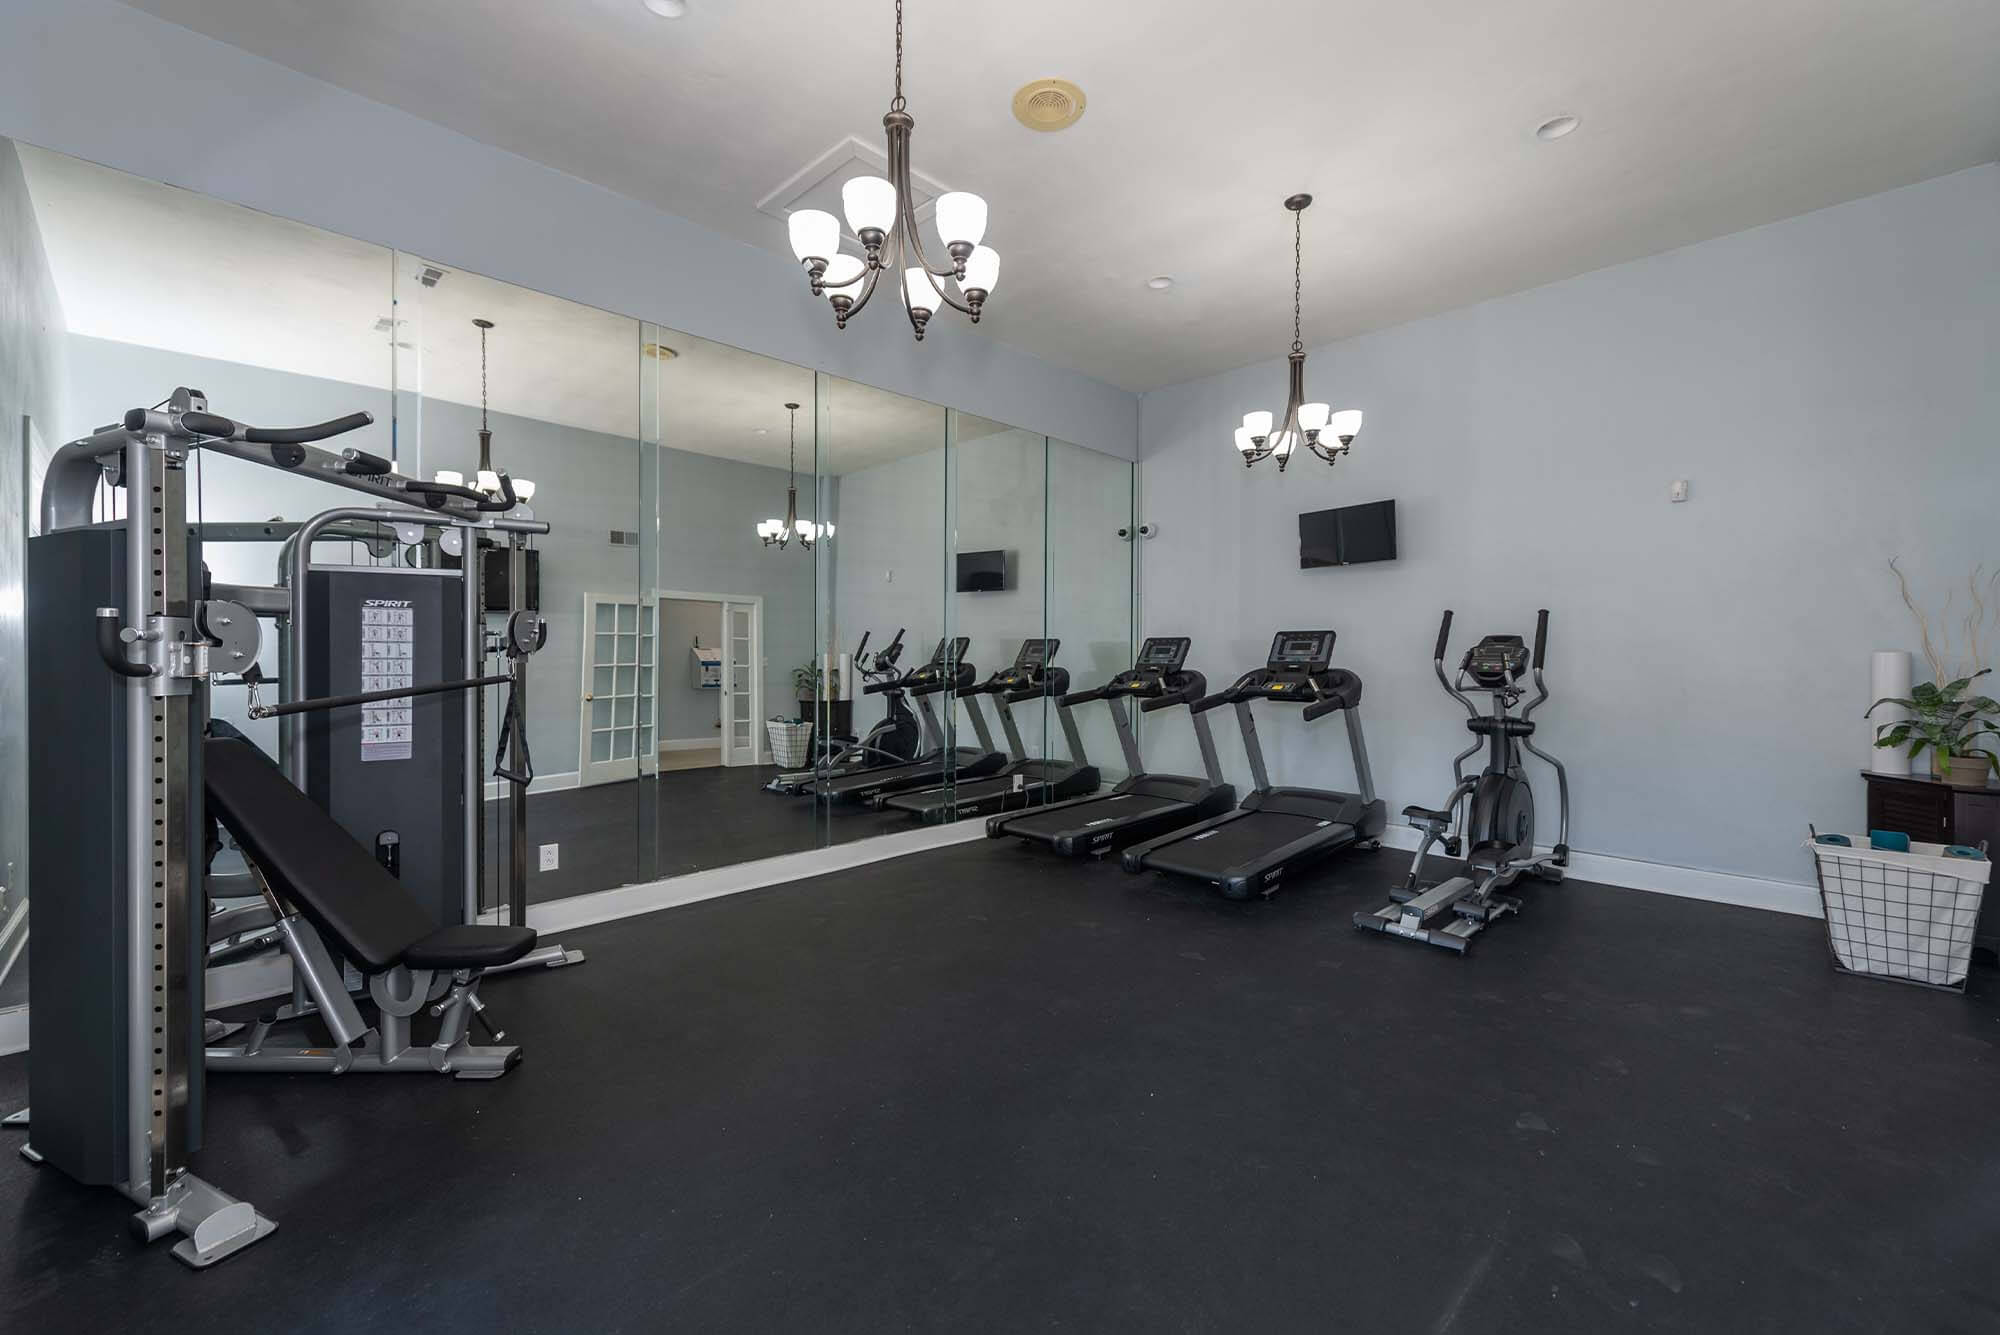 Fitness center at Reserves at Tidewater, Norfolk, Virginia